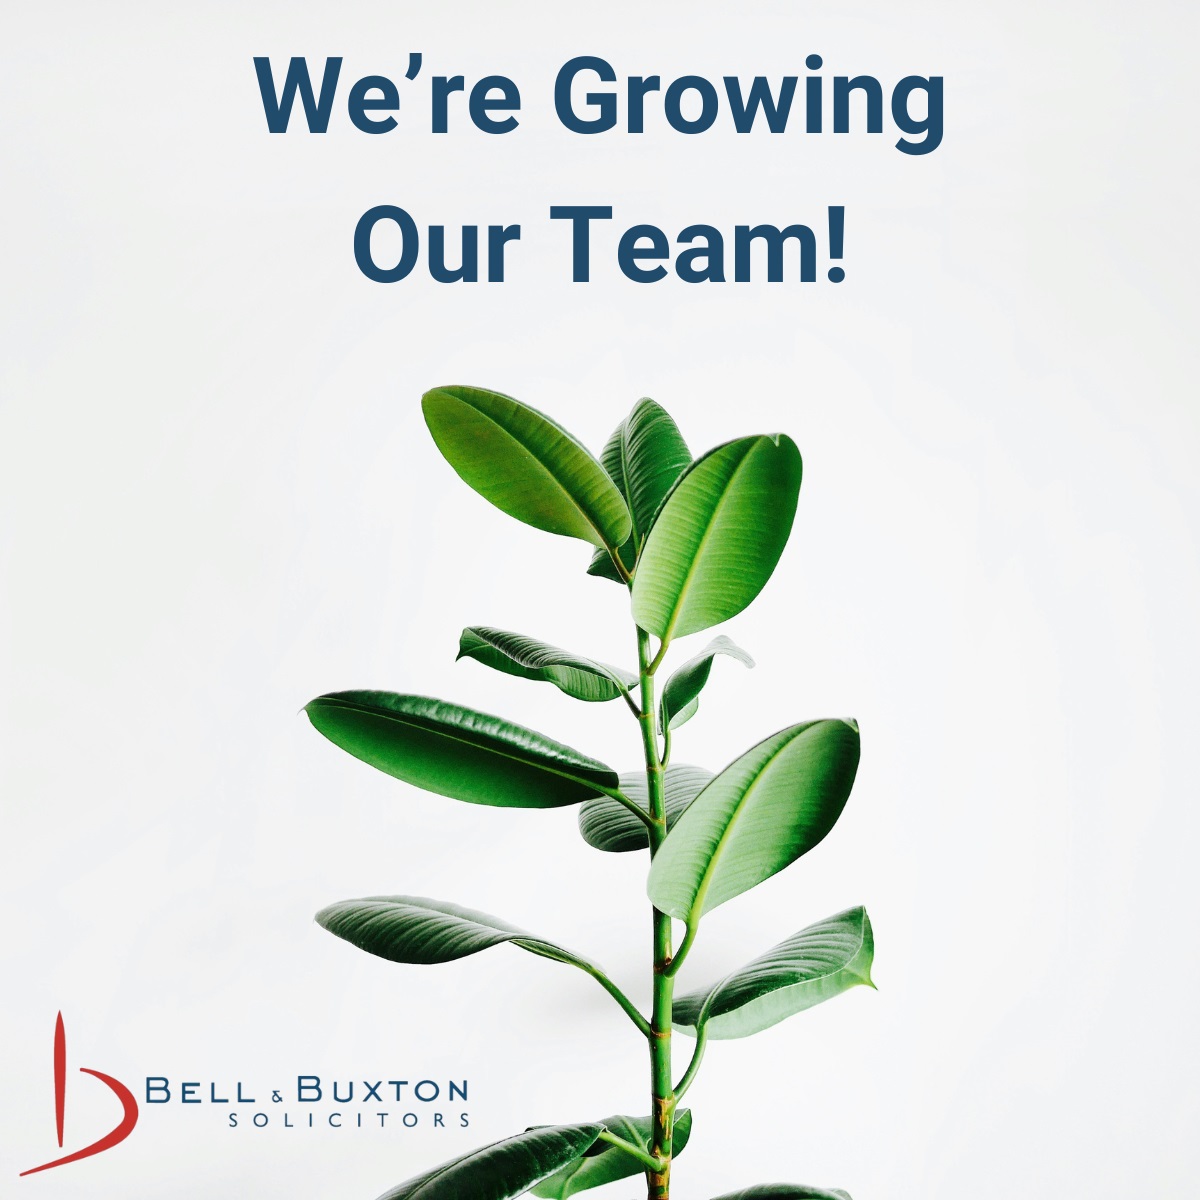 We’re growing! 

We’re looking for a Private Client Solicitor to join our award-winning Private Client Team in #SheffieldisSuper 

To learn more, visit bellbuxton.co.uk/recruitment/jo…